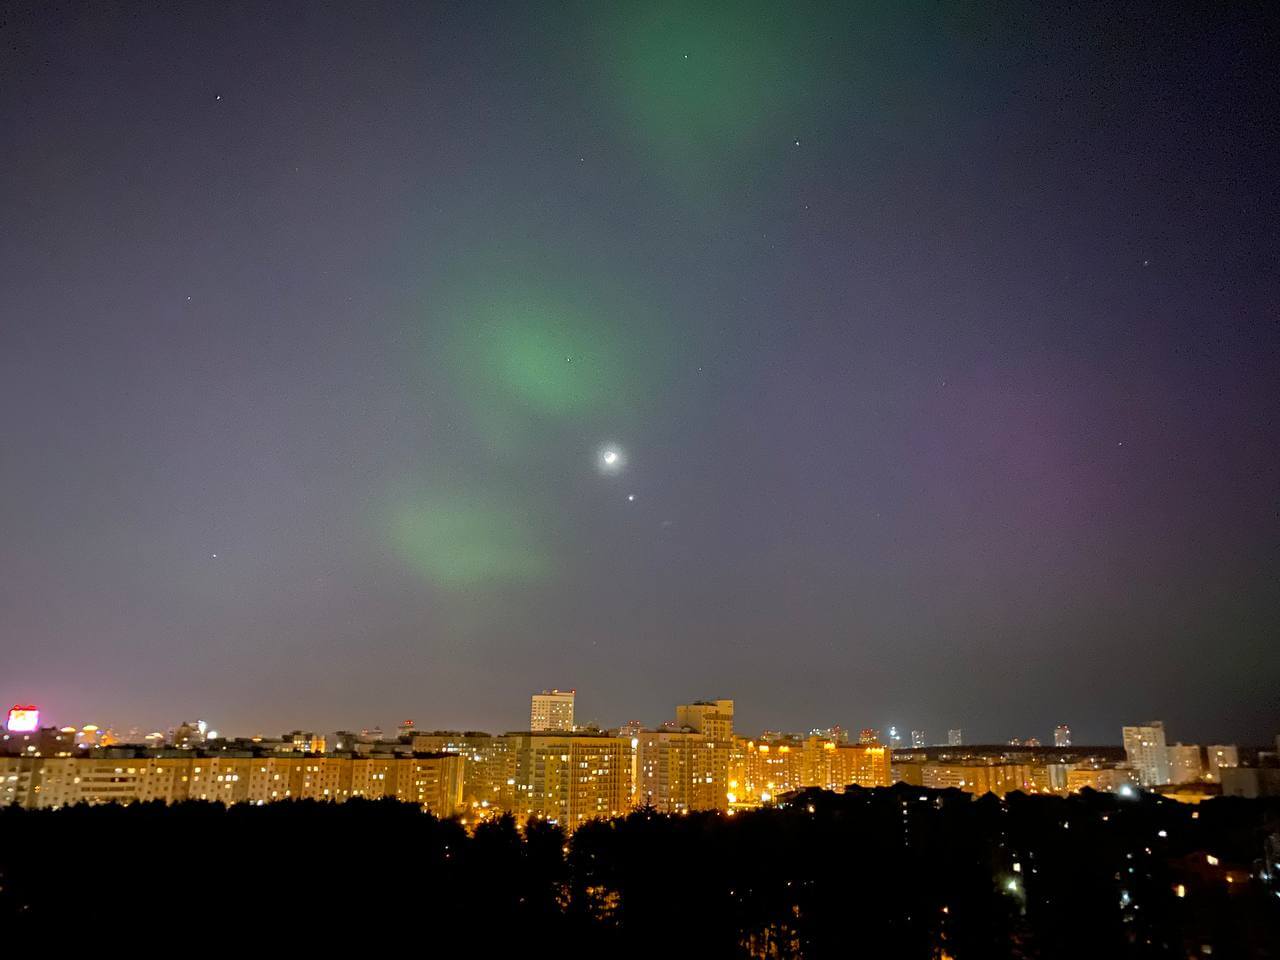 In the evening on April 23, polar lights were seen over Belarus